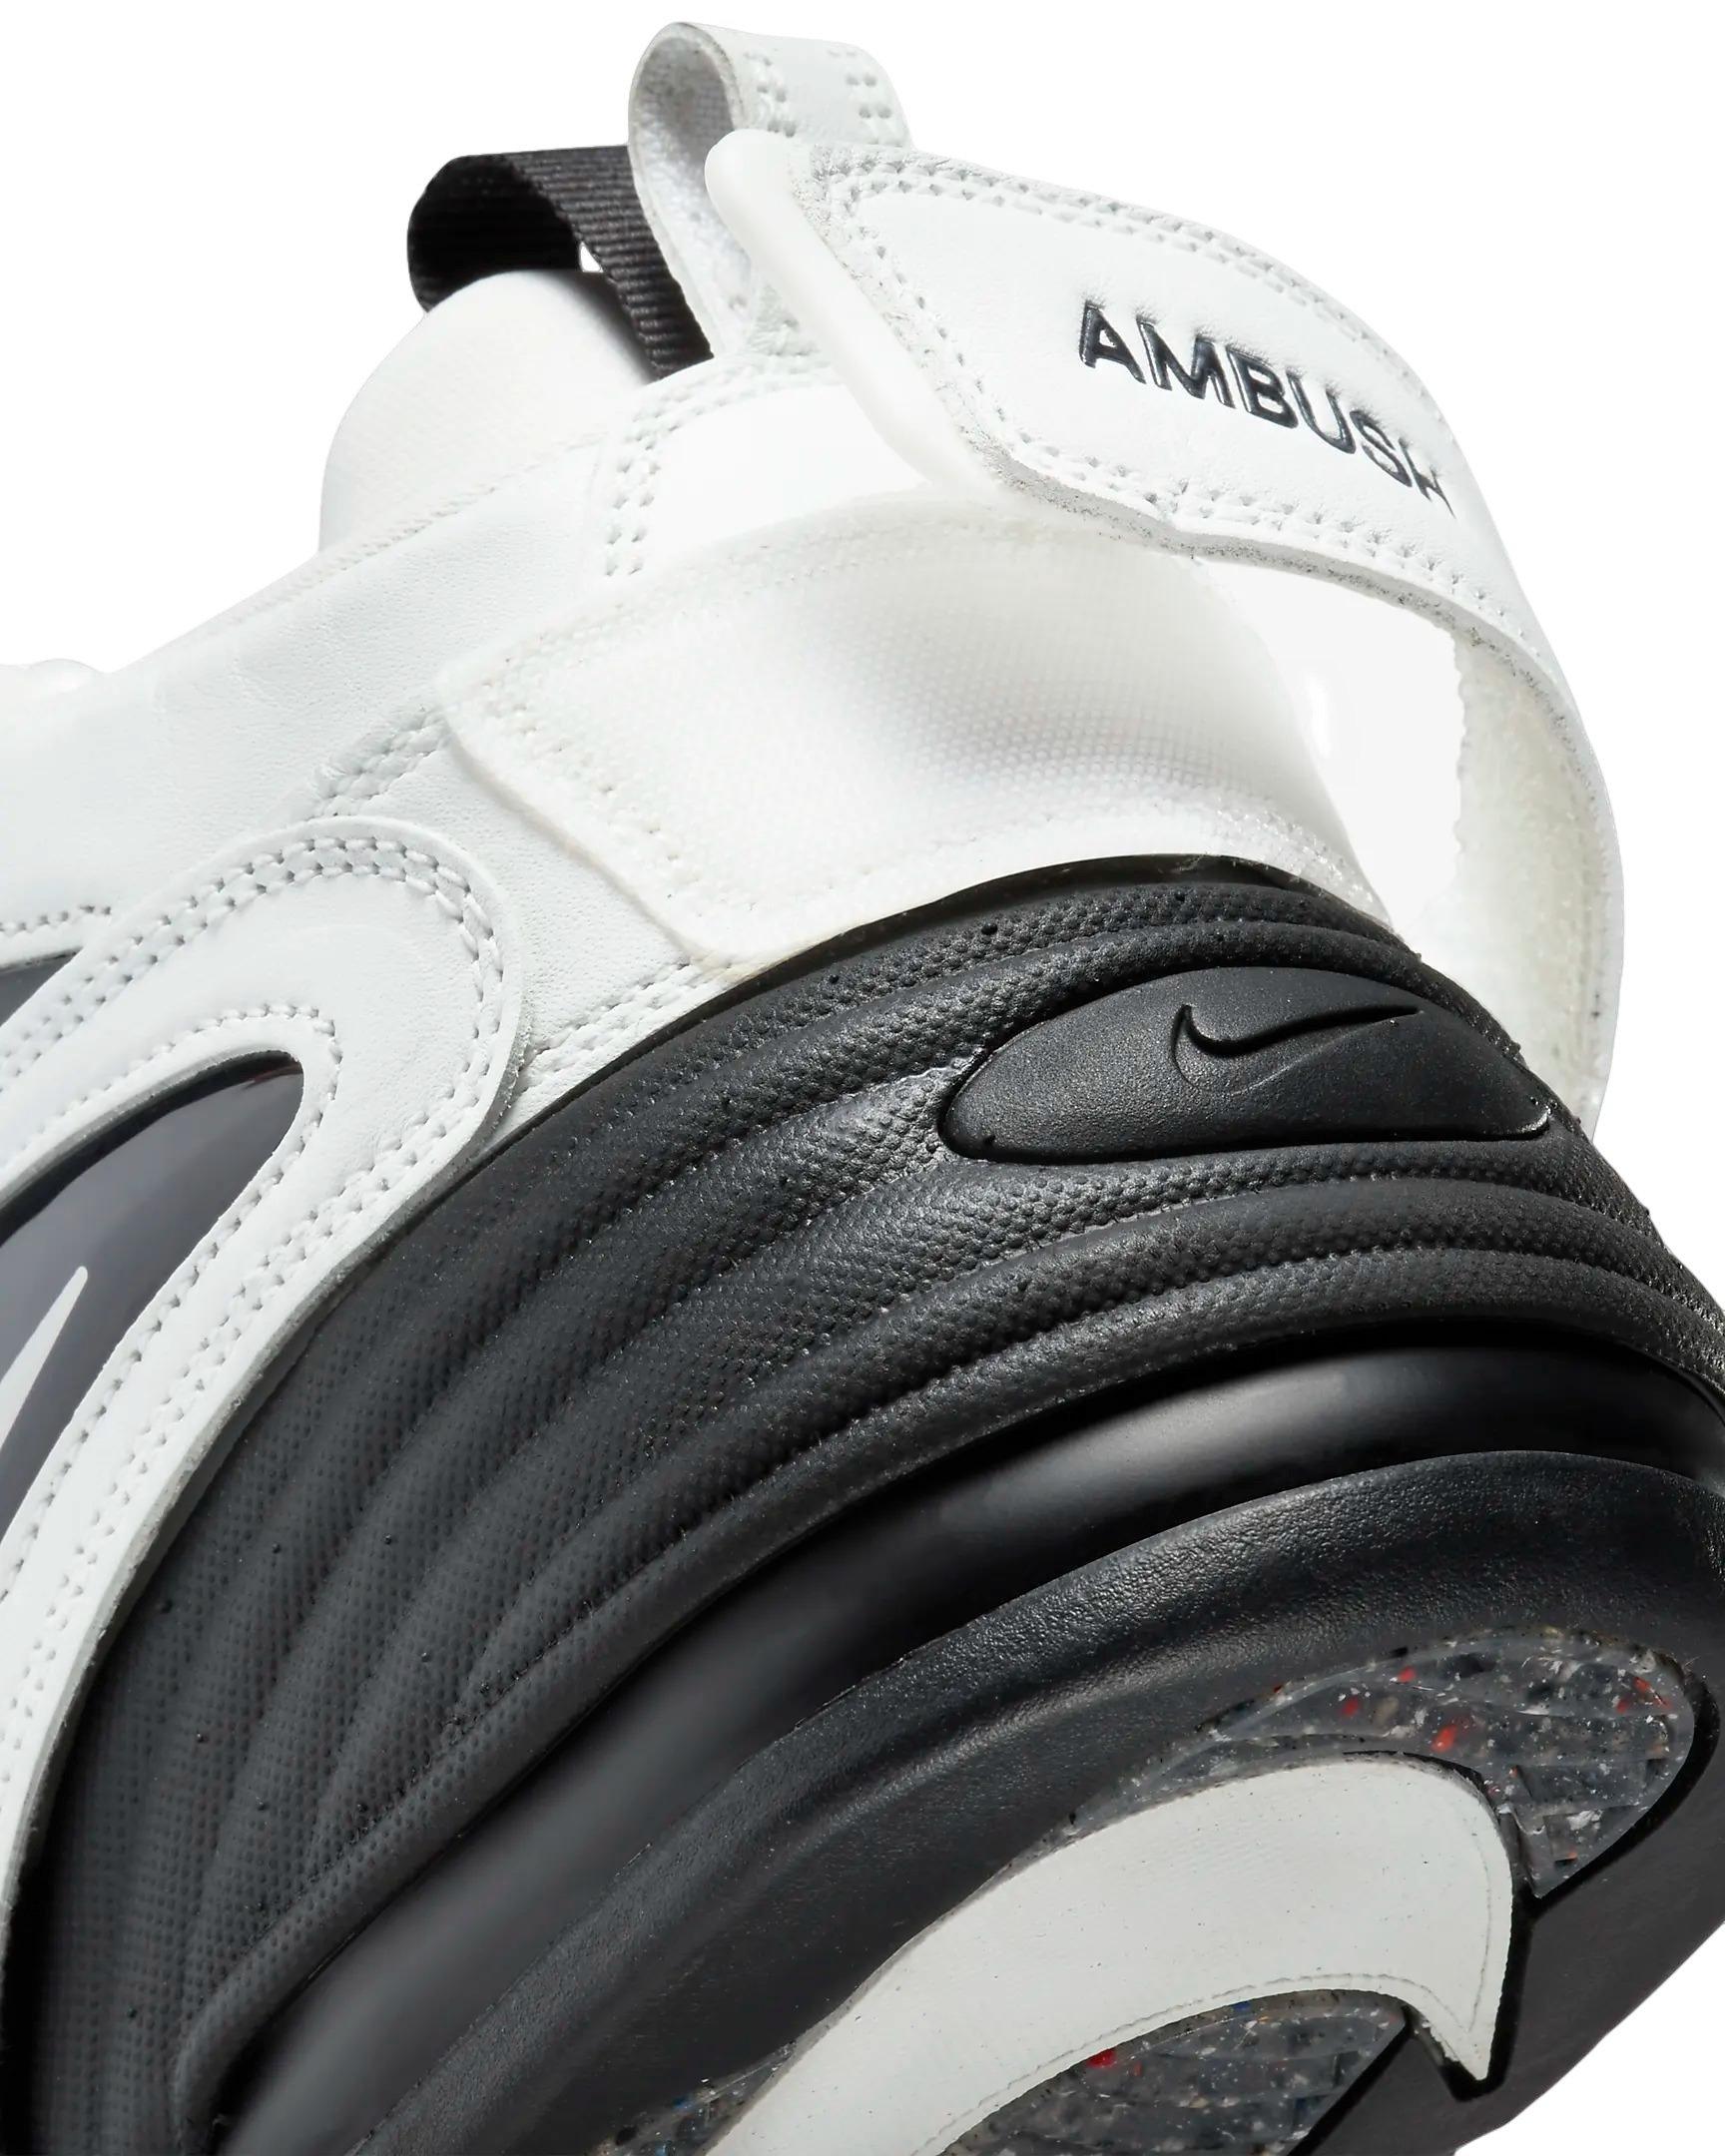 Review of the AMBUSH x Nike Air More Uptempo Low Black White - Detailed &  on feet look, Blogs